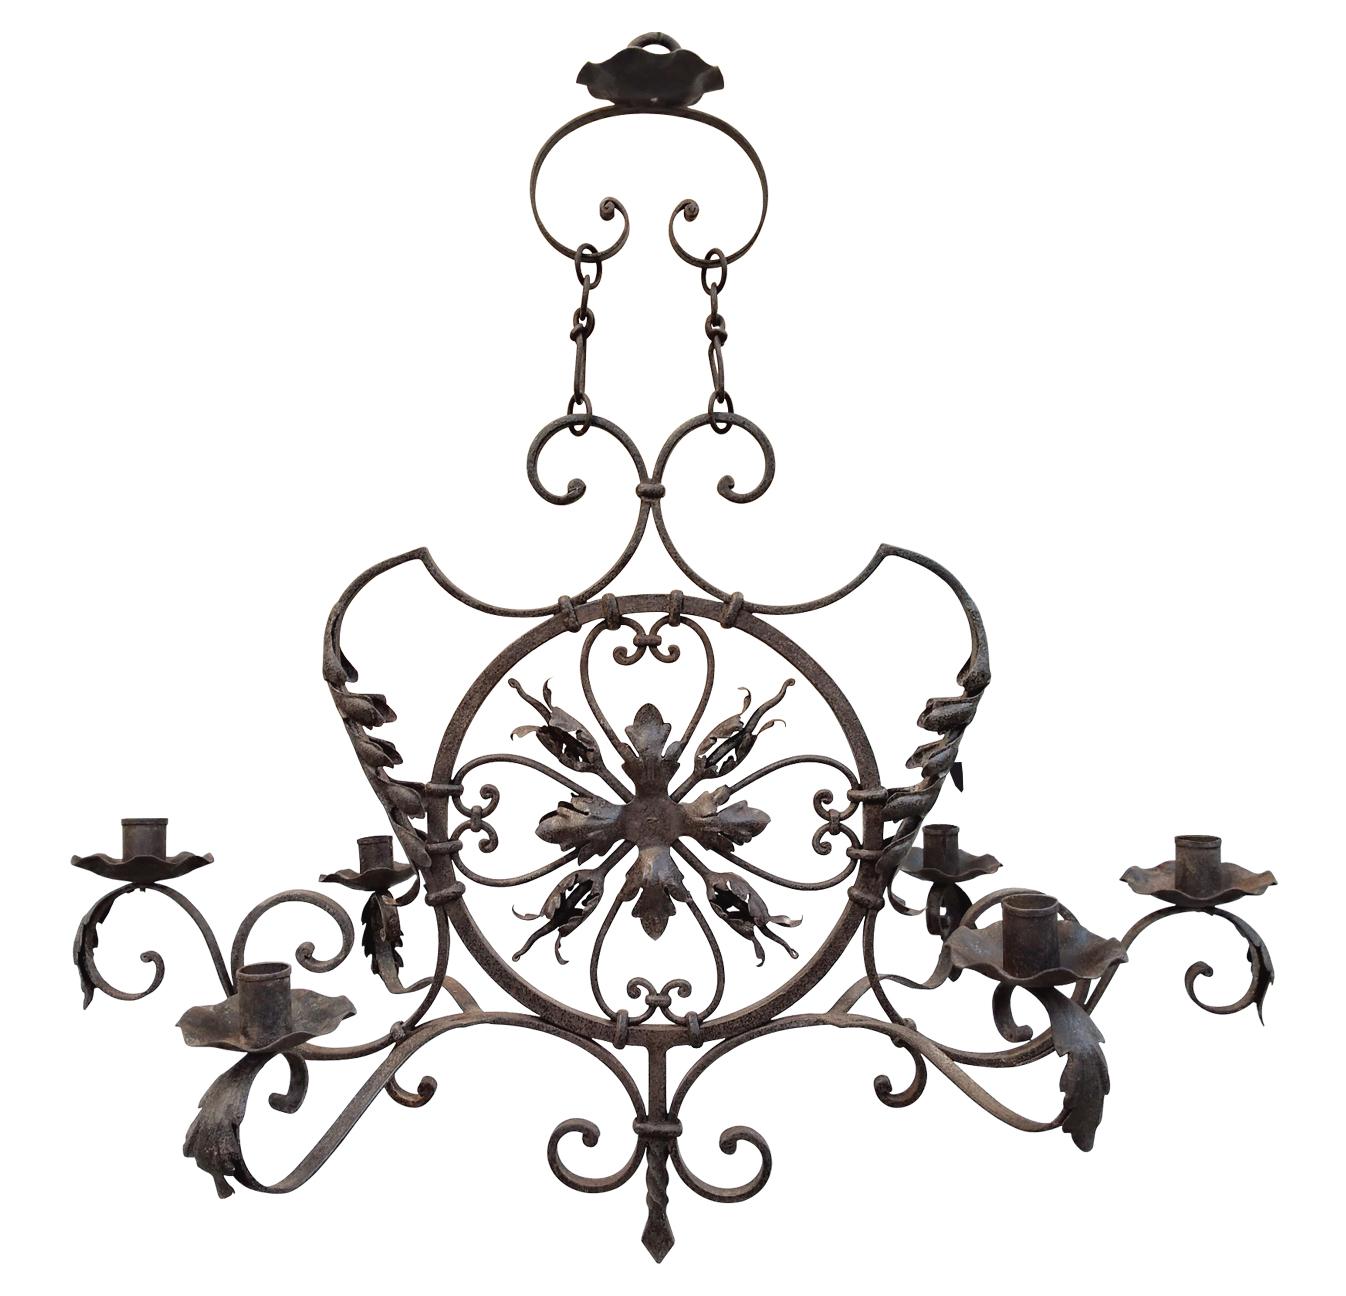 Large decorative forged iron chandelier, late 19th century. Forged in France, circa 1890, the large chandelier can receive 6 candles (candles not provided). On wavy shapes, the chandelier is decorated with leaves and flowers in forged iron. The